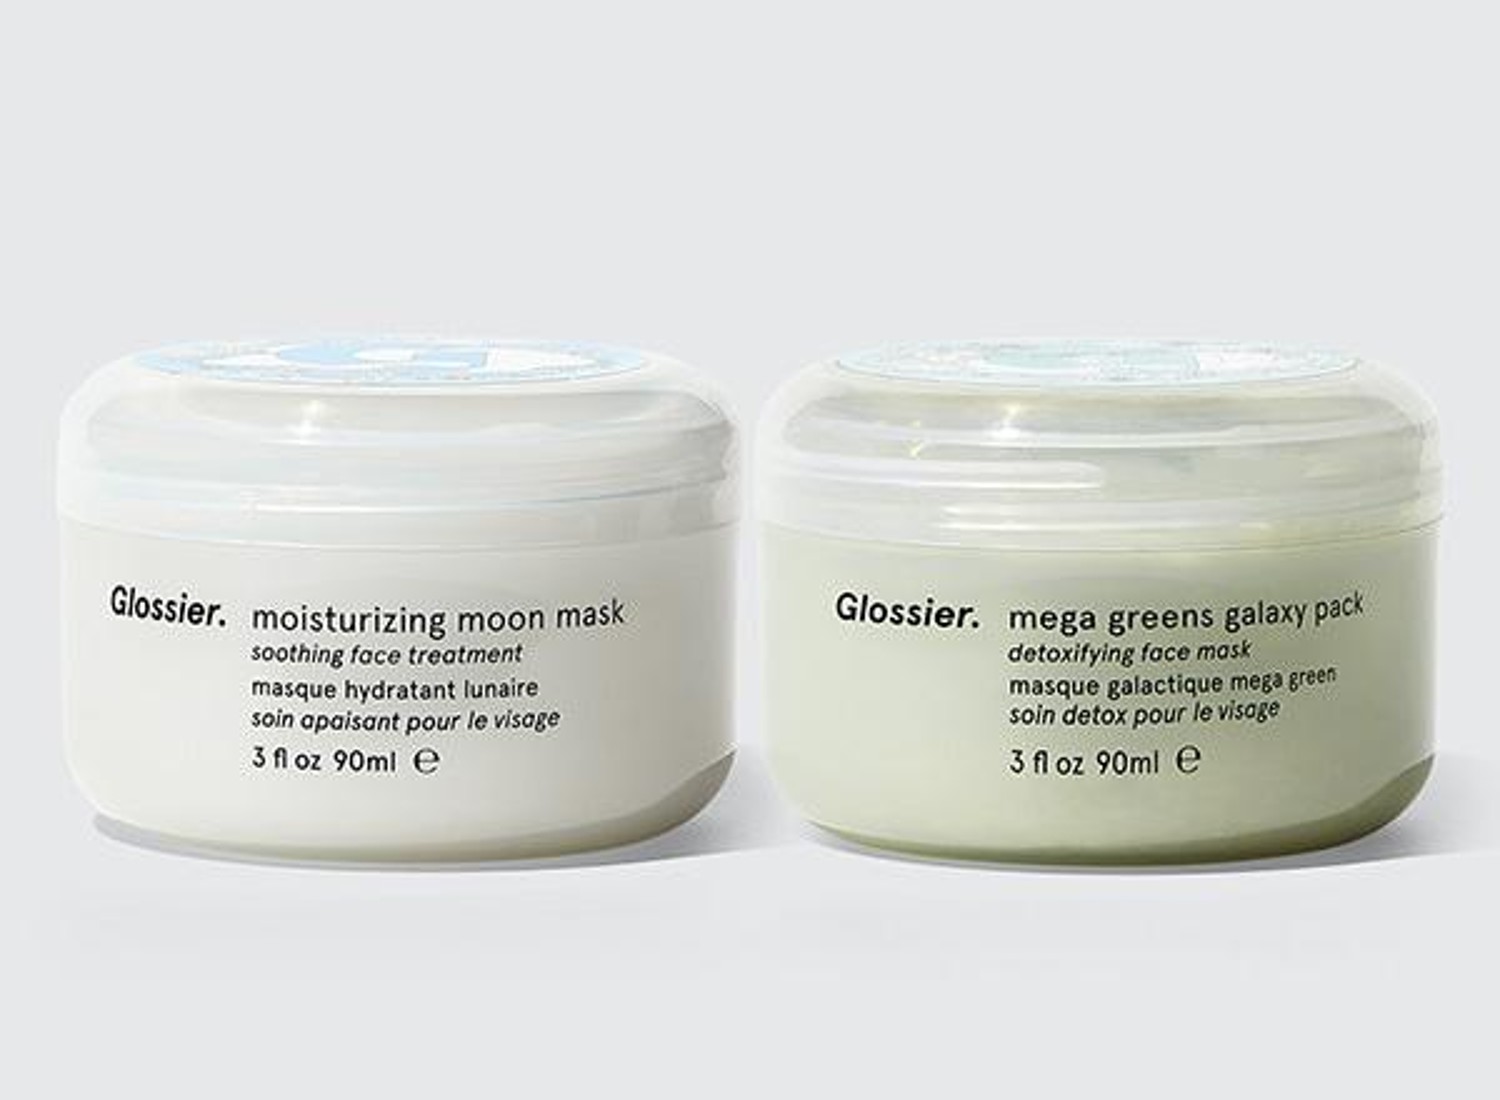 Duo of glossier masks